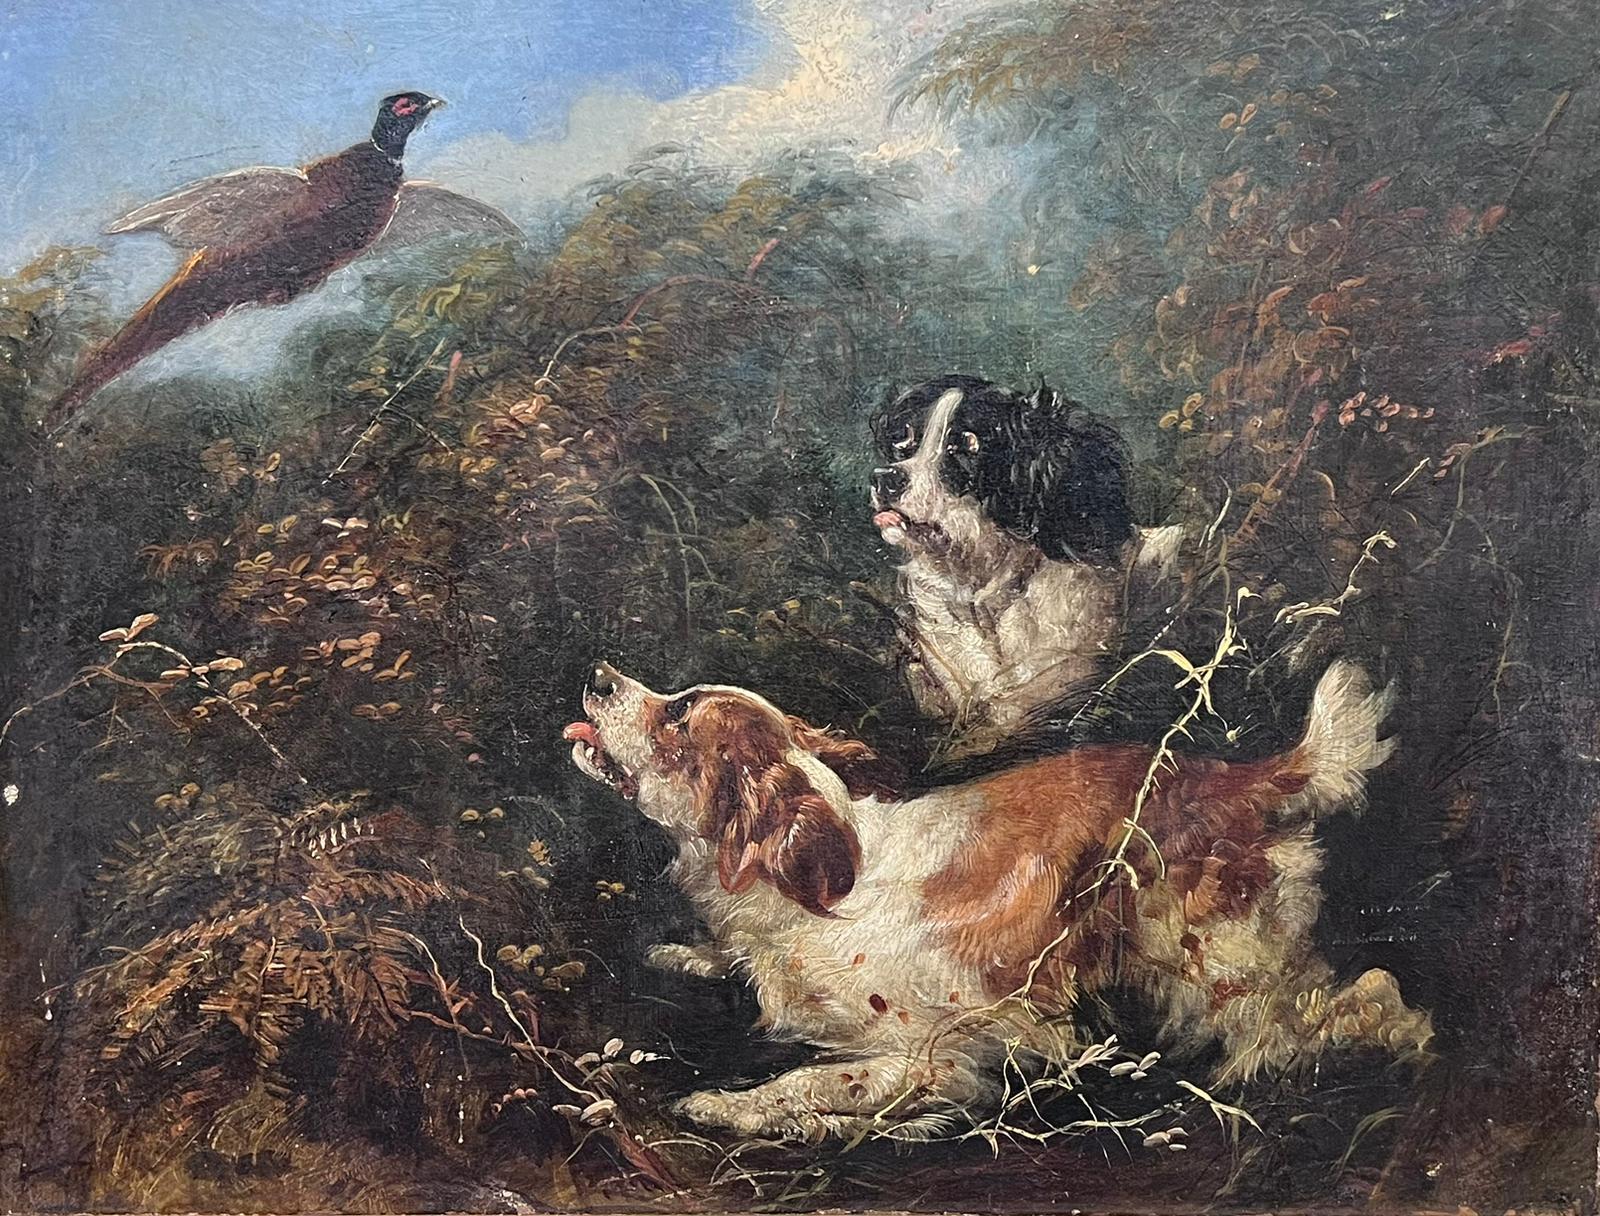 Spaniels Putting up a Pheasant
English sporting artist, mid 19th century
Circle of George Armfield (1808-1893)
oil on canvas, framed
framed: 17 x 21 inches
canvas: 14 x 18 inches
provenance: private collection, England
condition: overall good and